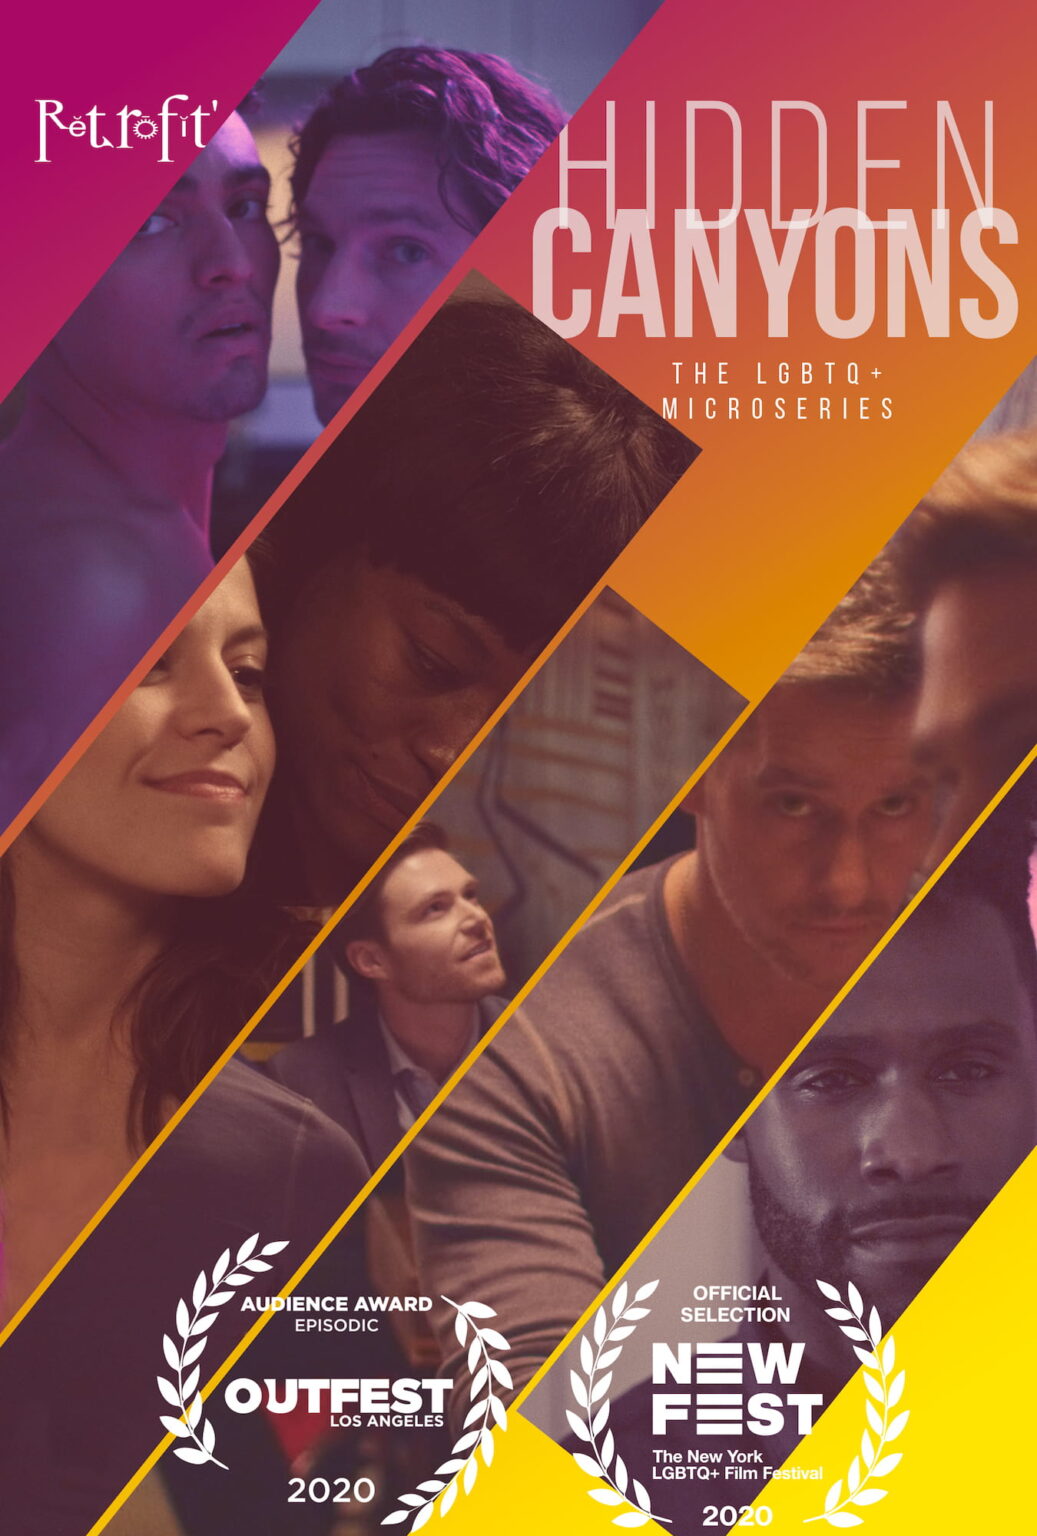 'Hidden Canyons' is an LGBTQ+ soap drama micro-series that is pairing an inventive format with riveting storytelling. Meet your new favorite series.